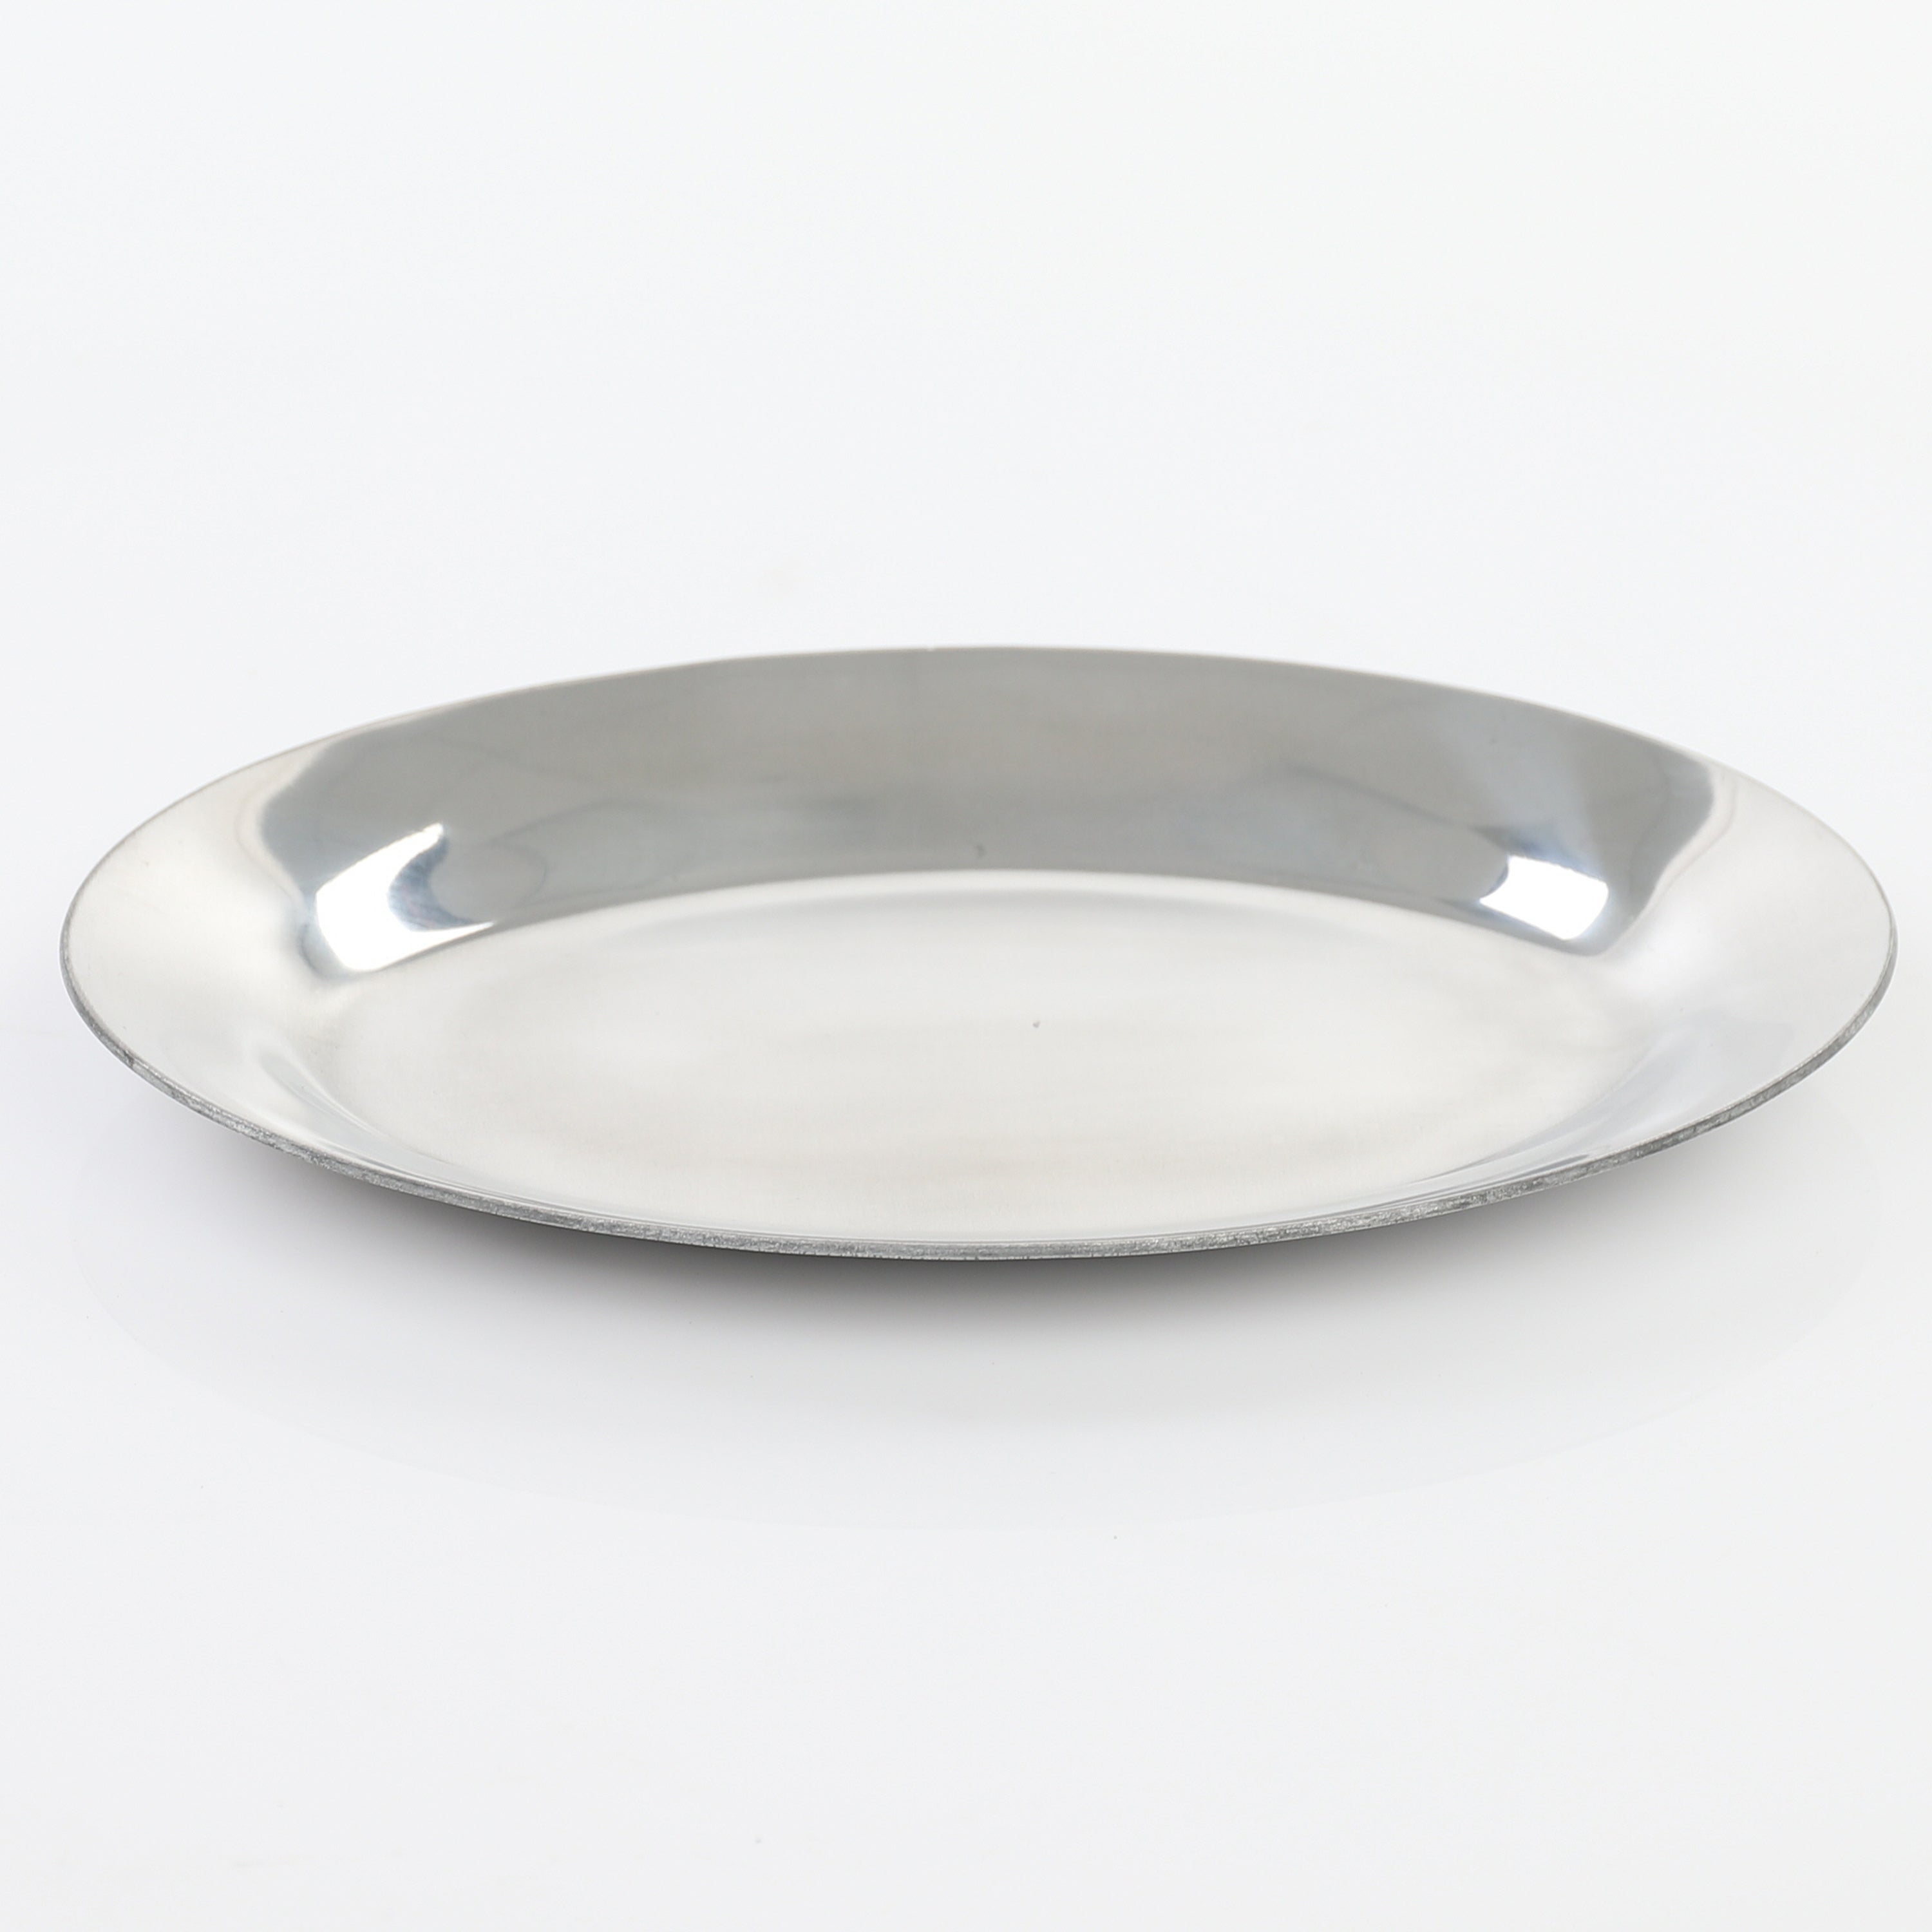 Adcraft SZ-11 Sizzle Thermal Platter